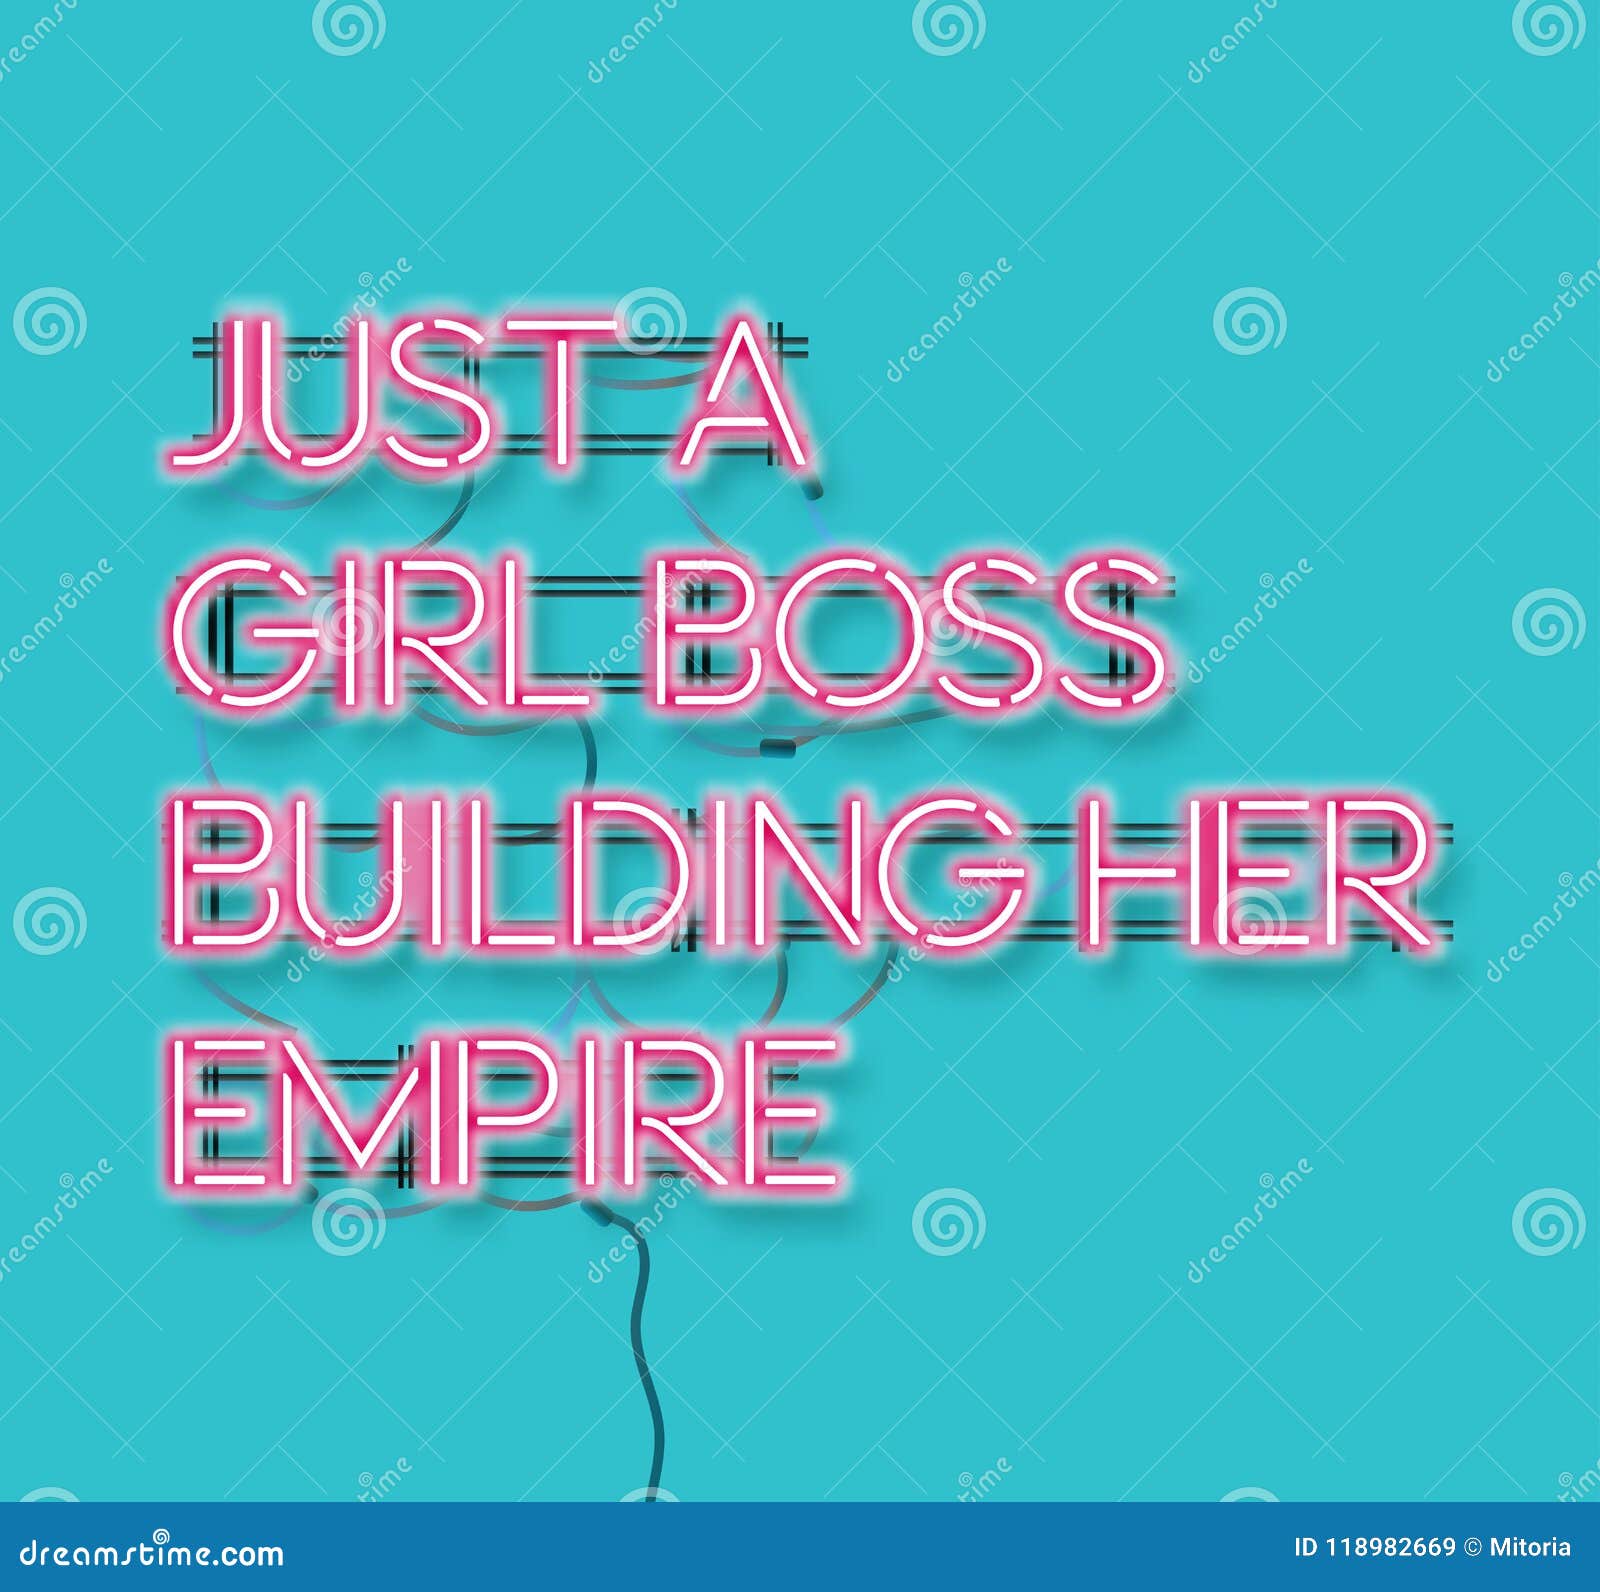 Just A Girl Boss Building Her Empire Pink Neon Signon Blue Background.  Modern Feminism Quote Isolated On Blue Background Stock Vector -  Illustration Of Design, Script: 118982669